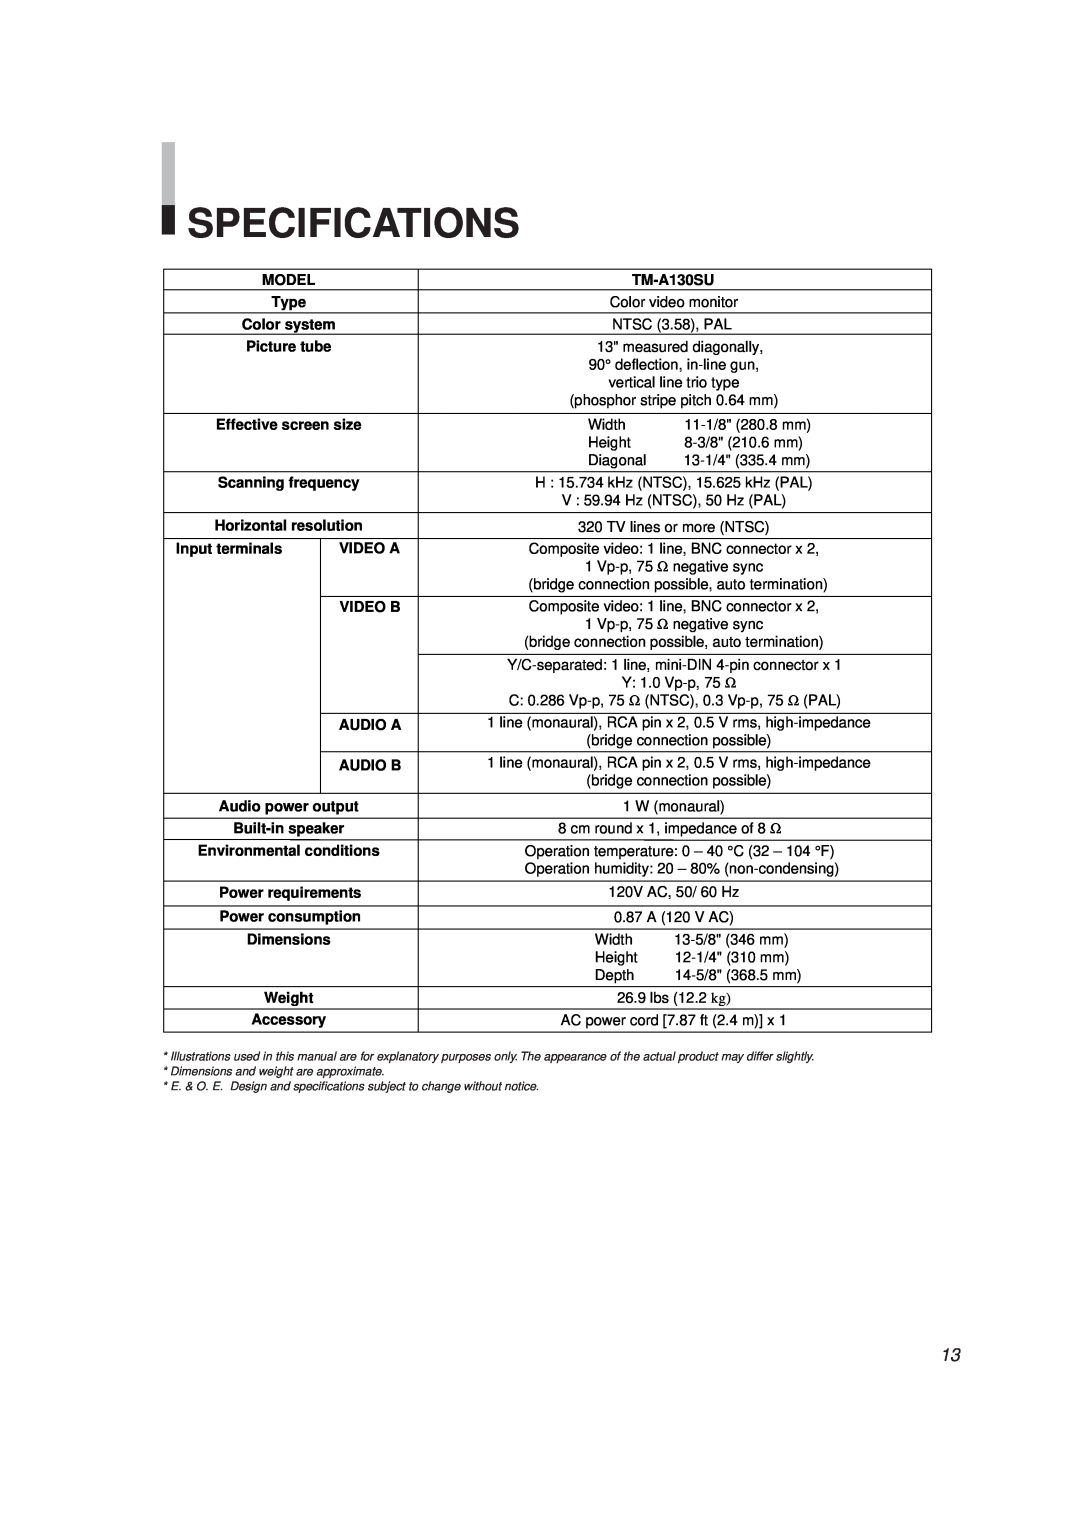 JVC TM-A130SU manual Specifications 